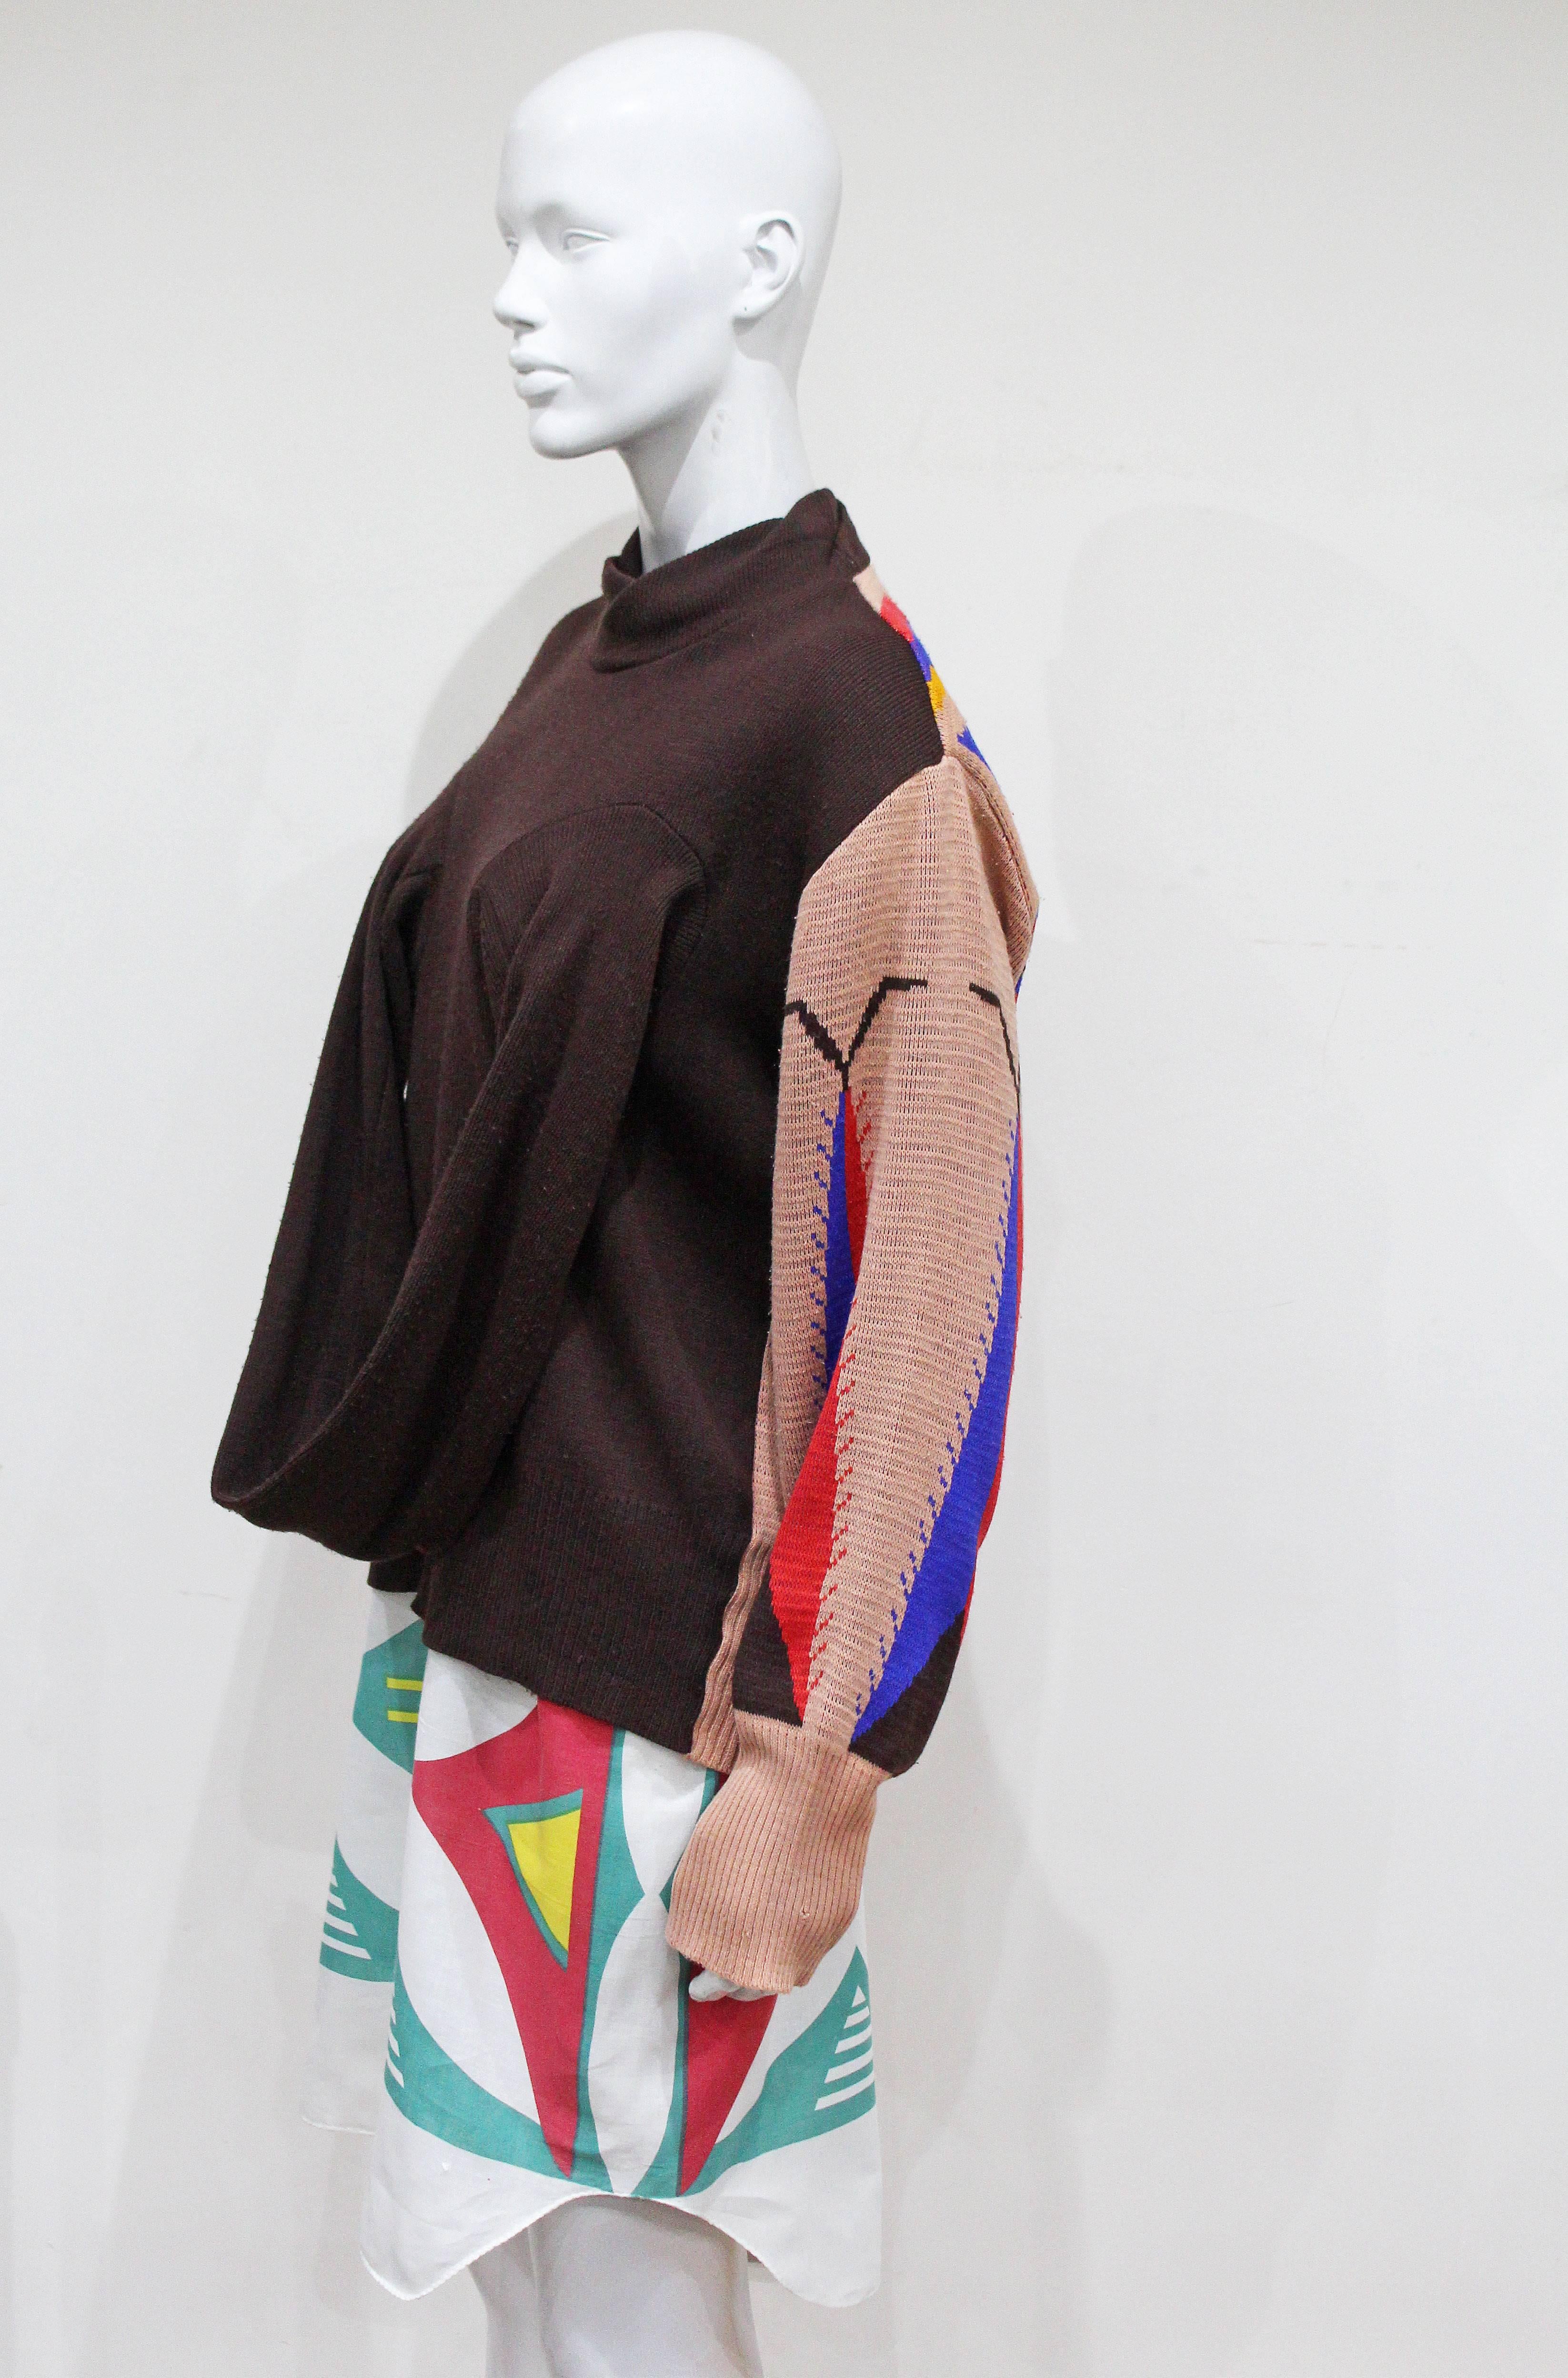 A rare World's End 'Savages' ensemble designed by Vivienne Westwood and Malcolm Mclaren for the Spring/Summer 1982 collection which was there second runway show. The ensemble features a knitted brown acrylic jumper with looped tube of fabric linking